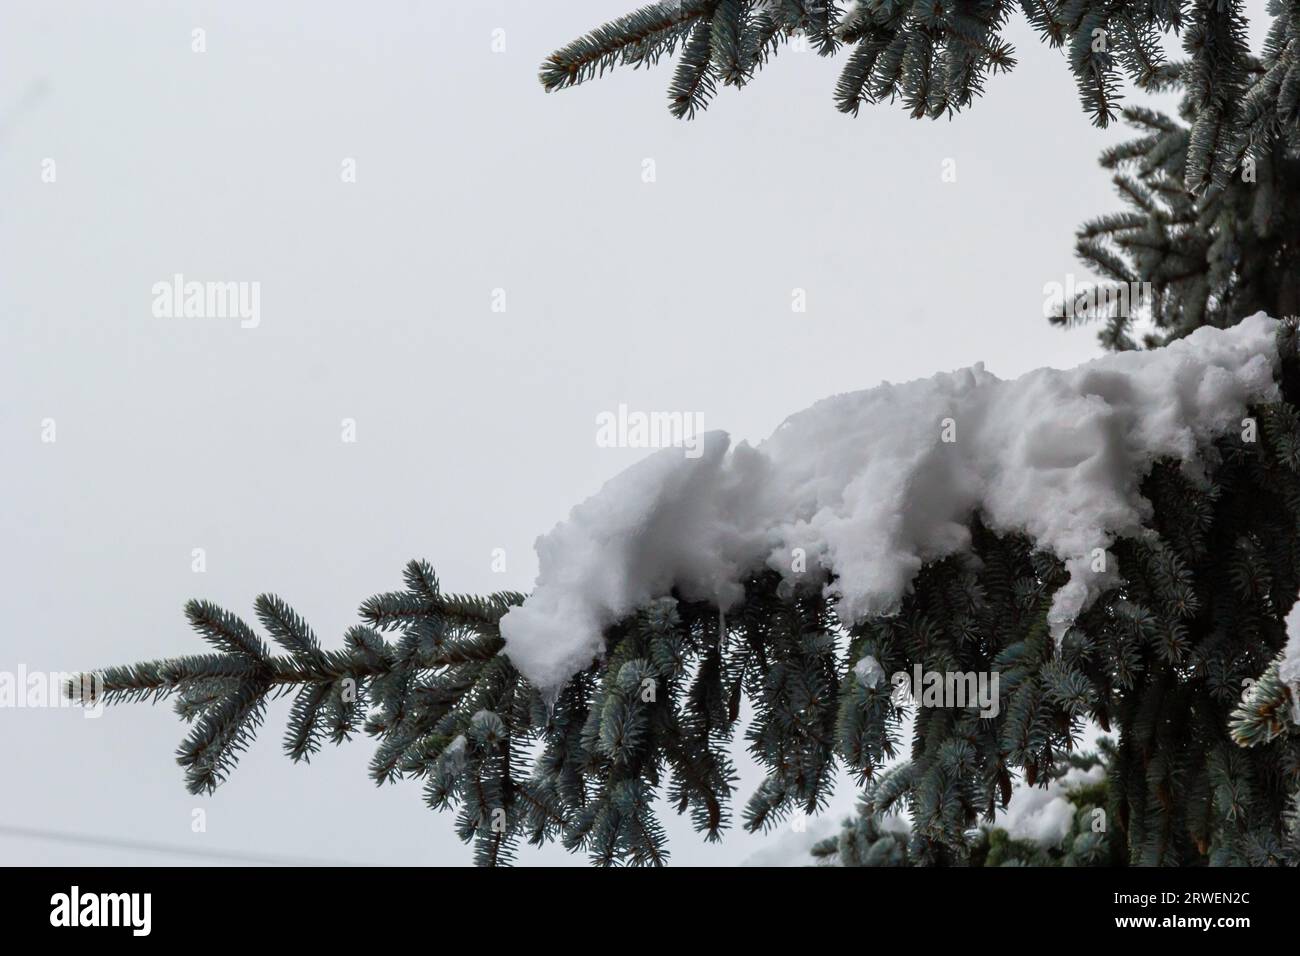 Spruce branch with small green needles under fluffy fresh white snow close-up. Stock Photo